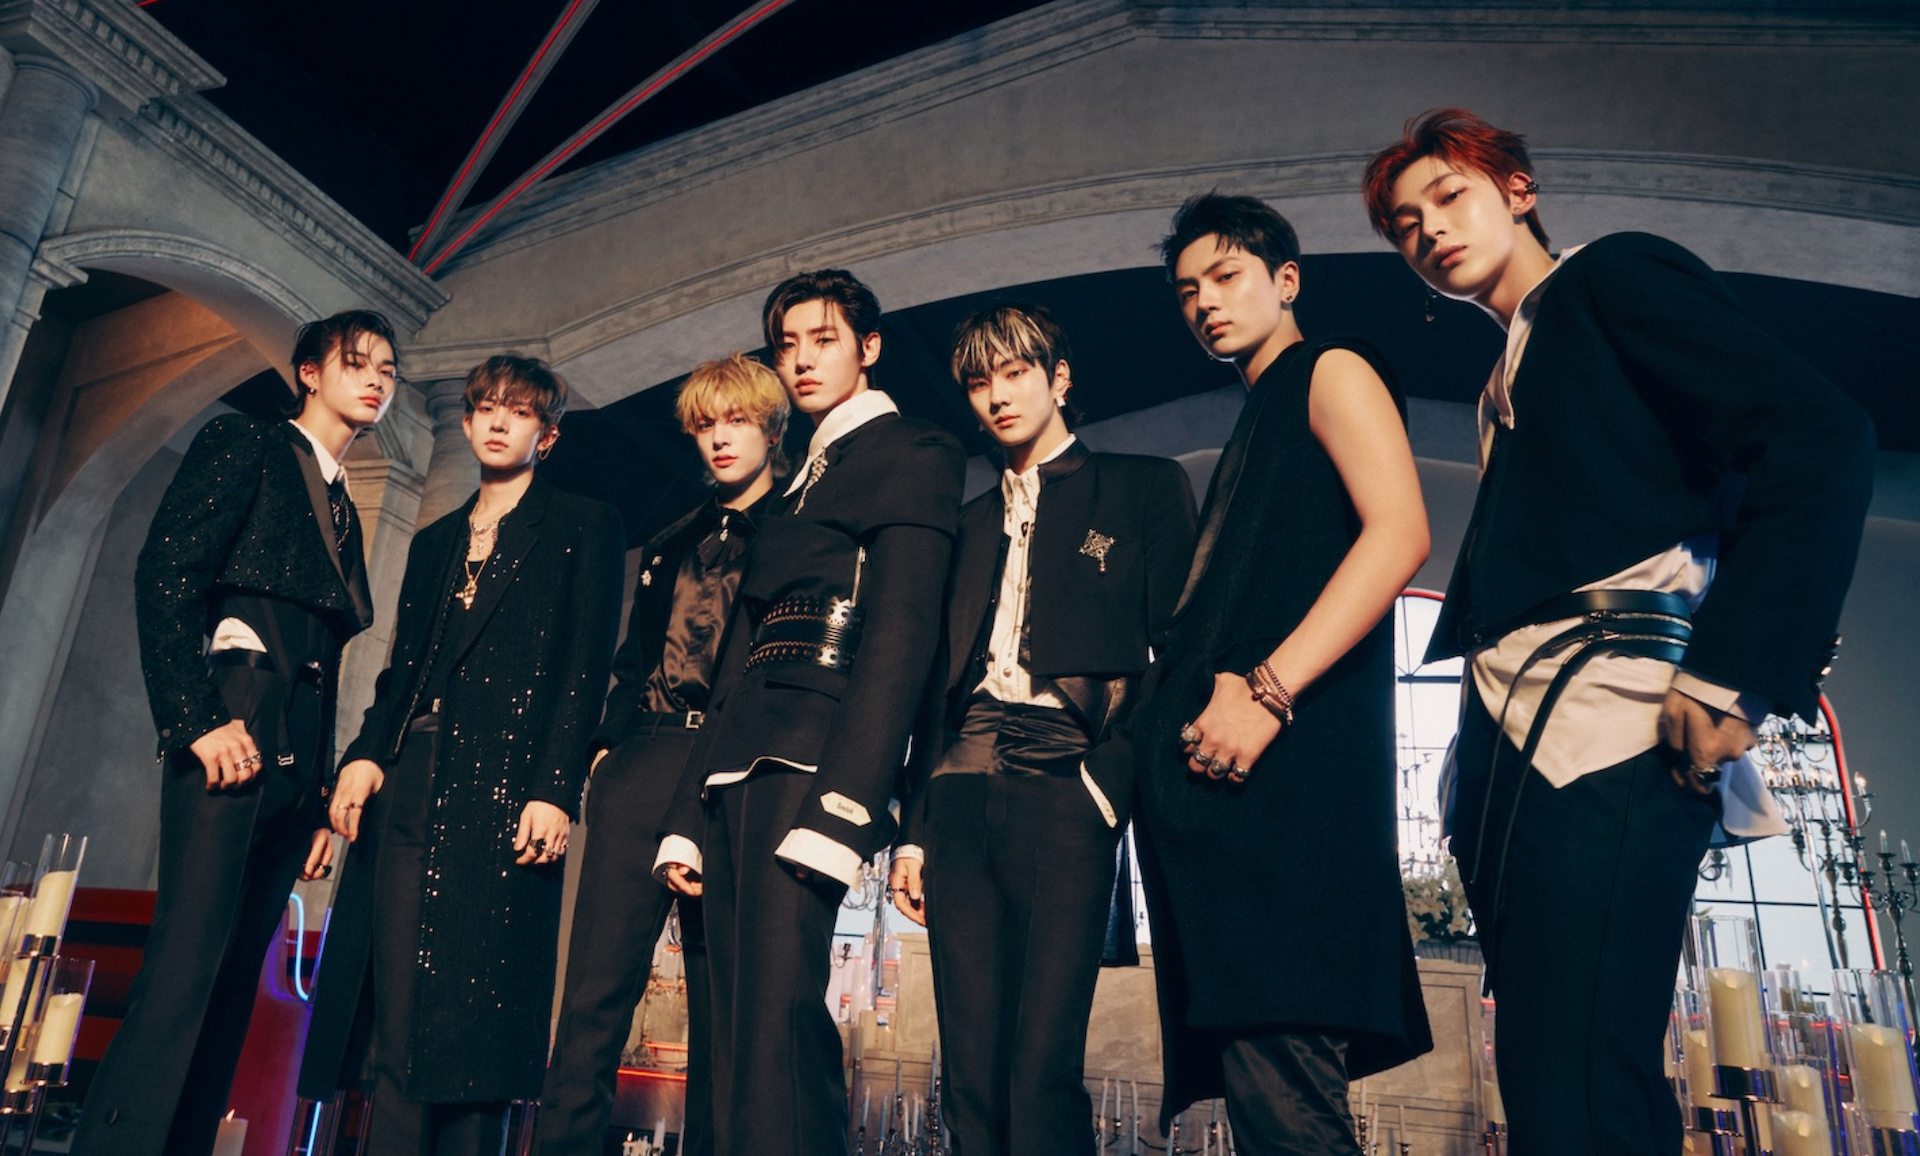 ENHYPEN will finally be returning, as BE:LIFT Entertainment finally revealed news of the group's upcoming mini-album, which will be released on May 22 titled 'DARK BLOOD.'